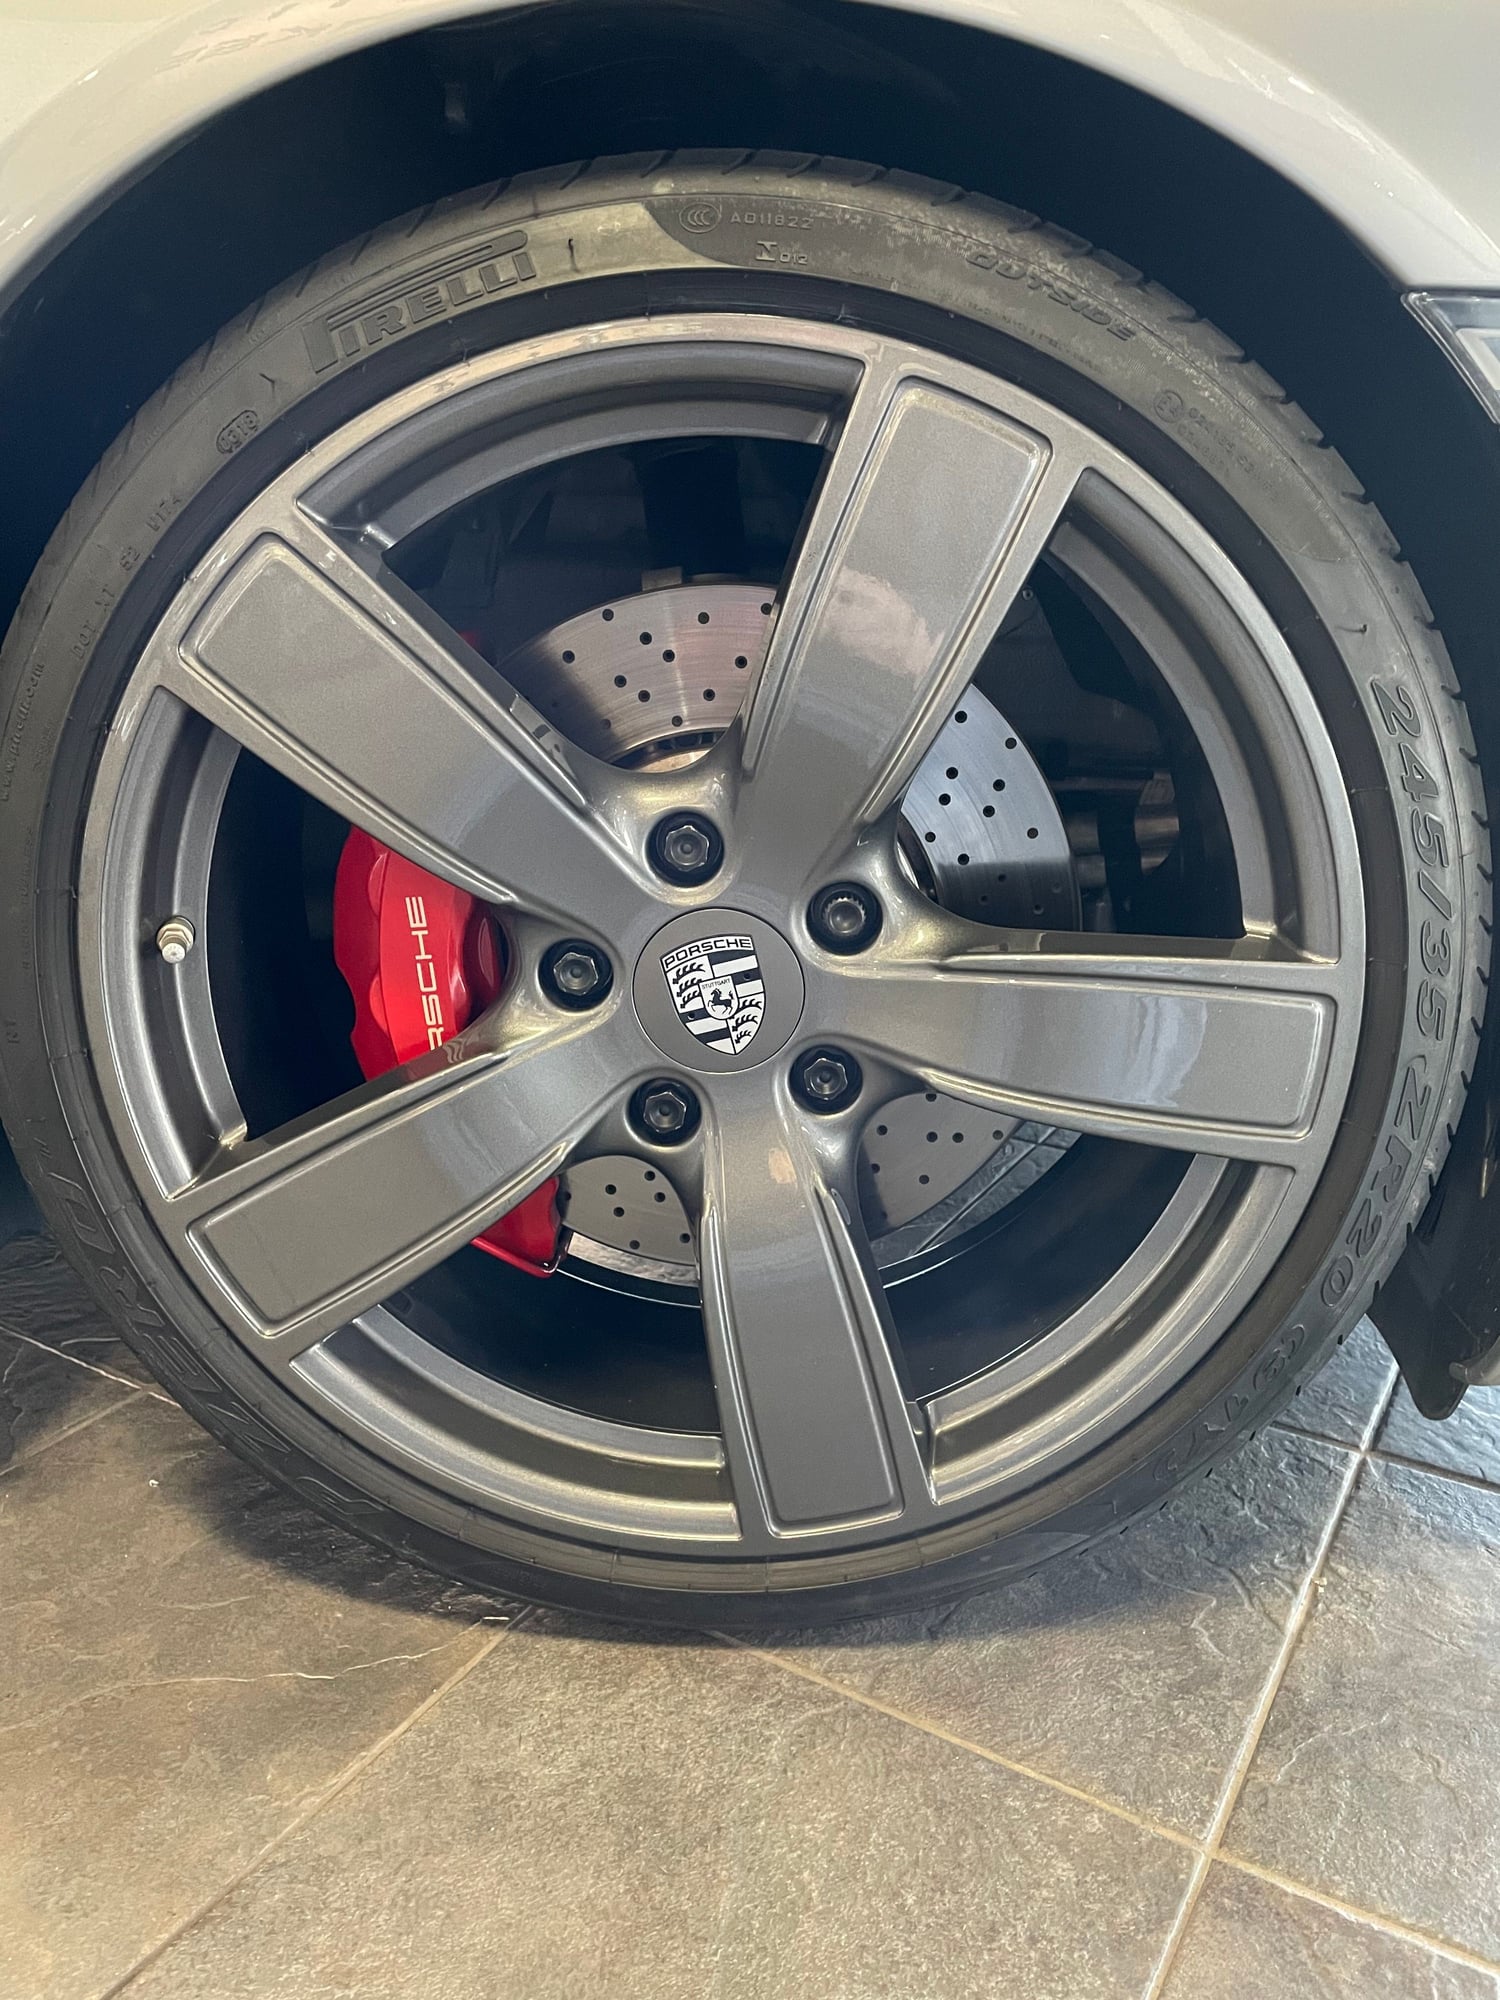 Wheels and Tires/Axles - Carrera T wheels and tires - 20" Carrera Sport style - Used - 2017 to 2019 Porsche 911 - Harrisonburg, VA 22801, United States